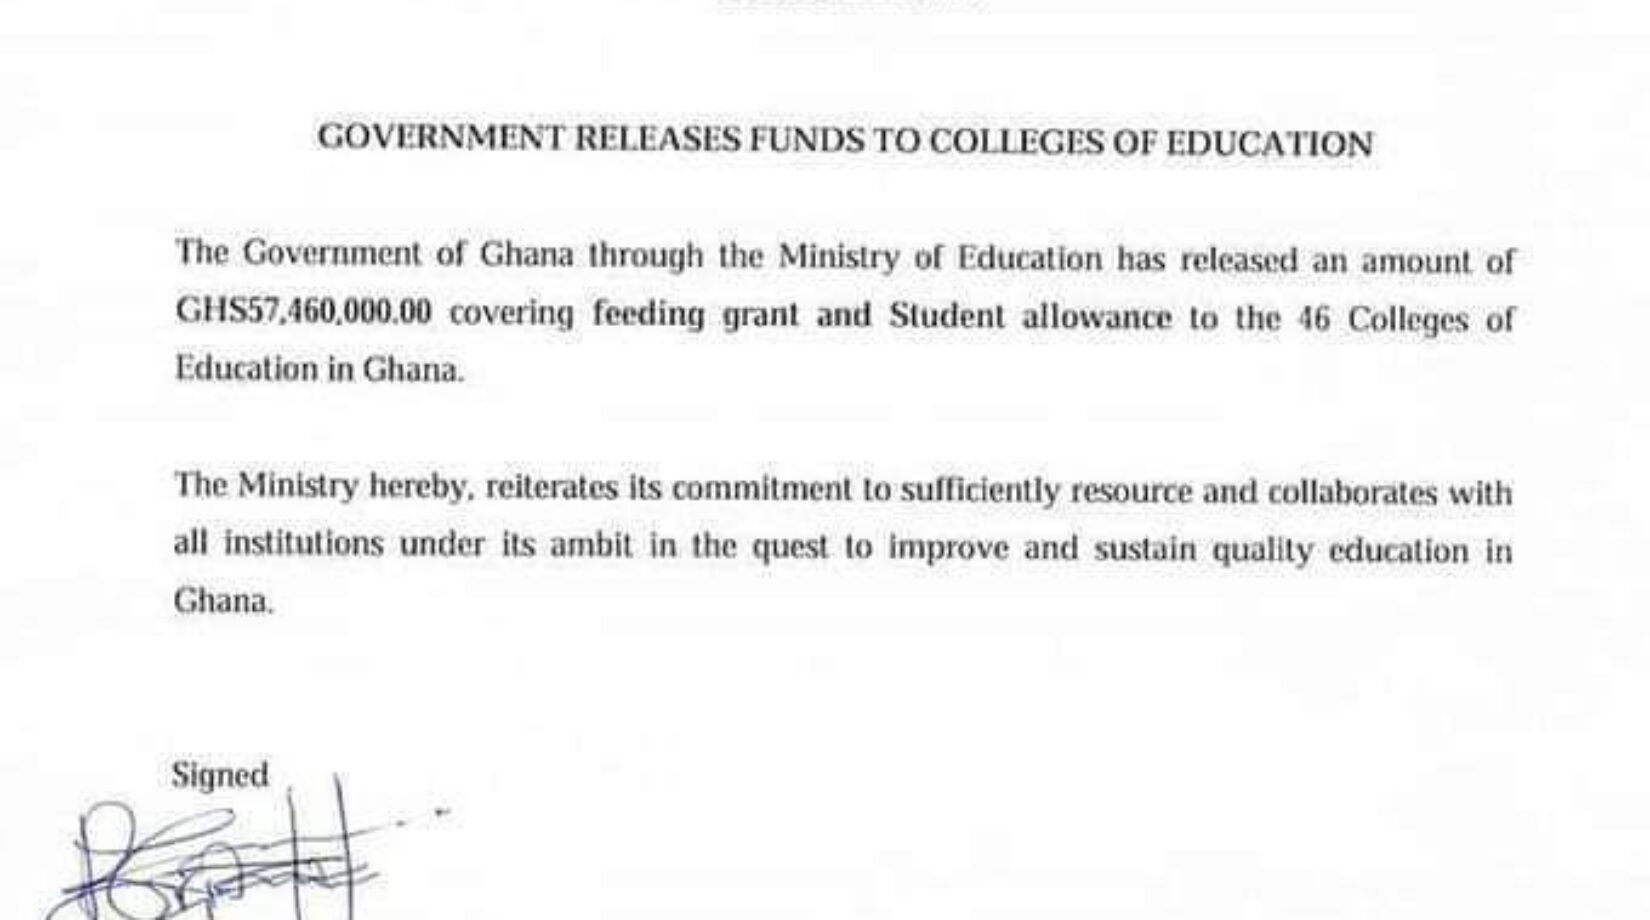 Gov’t releases Funds to Colleges of Education